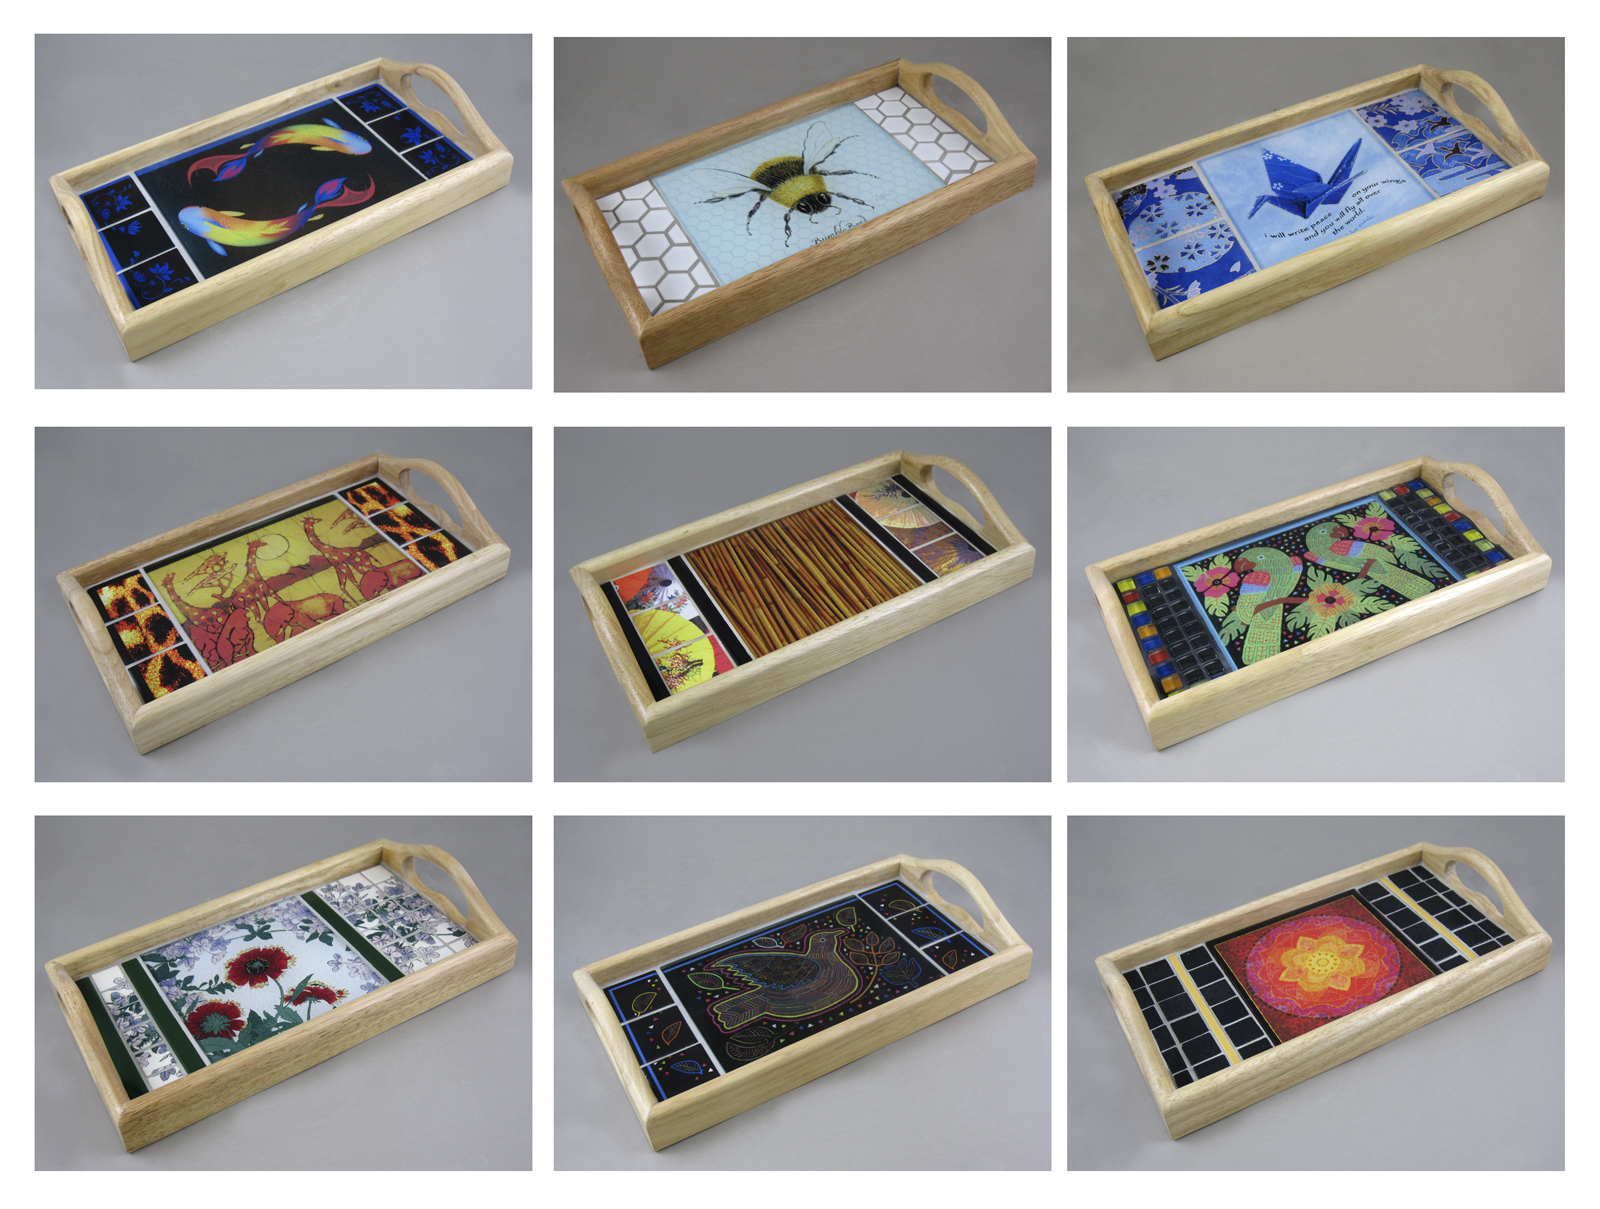 A sampling of serving trays I made using a variety of sublimated tiles - glass and ceramic ( ra